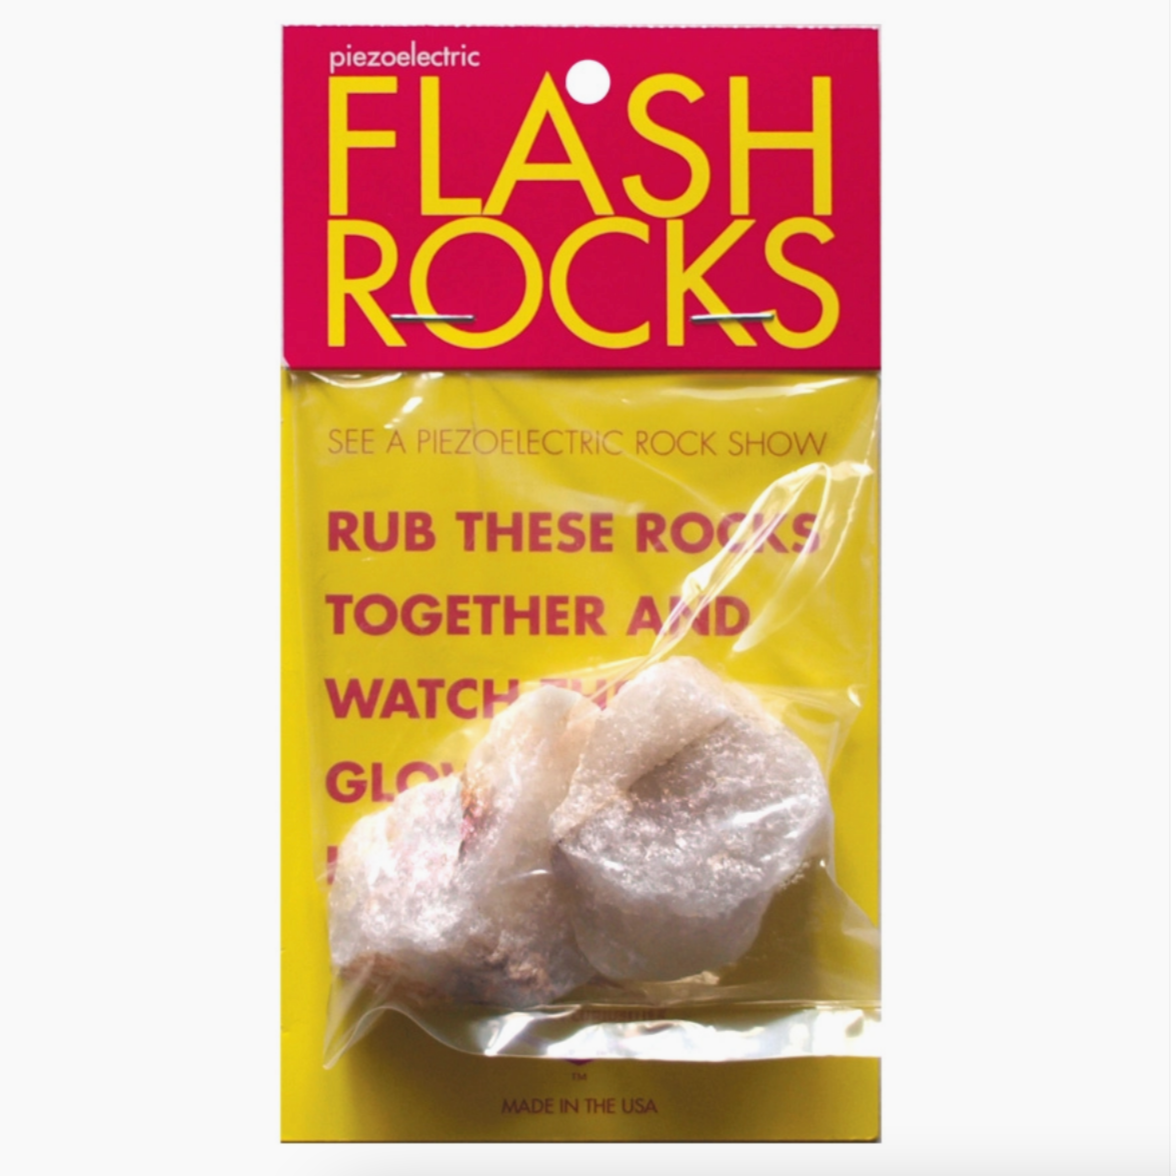 flash rocks packaging with rocks. reads "see a piezoelectric rock shw. Rub these rocks together and watch"